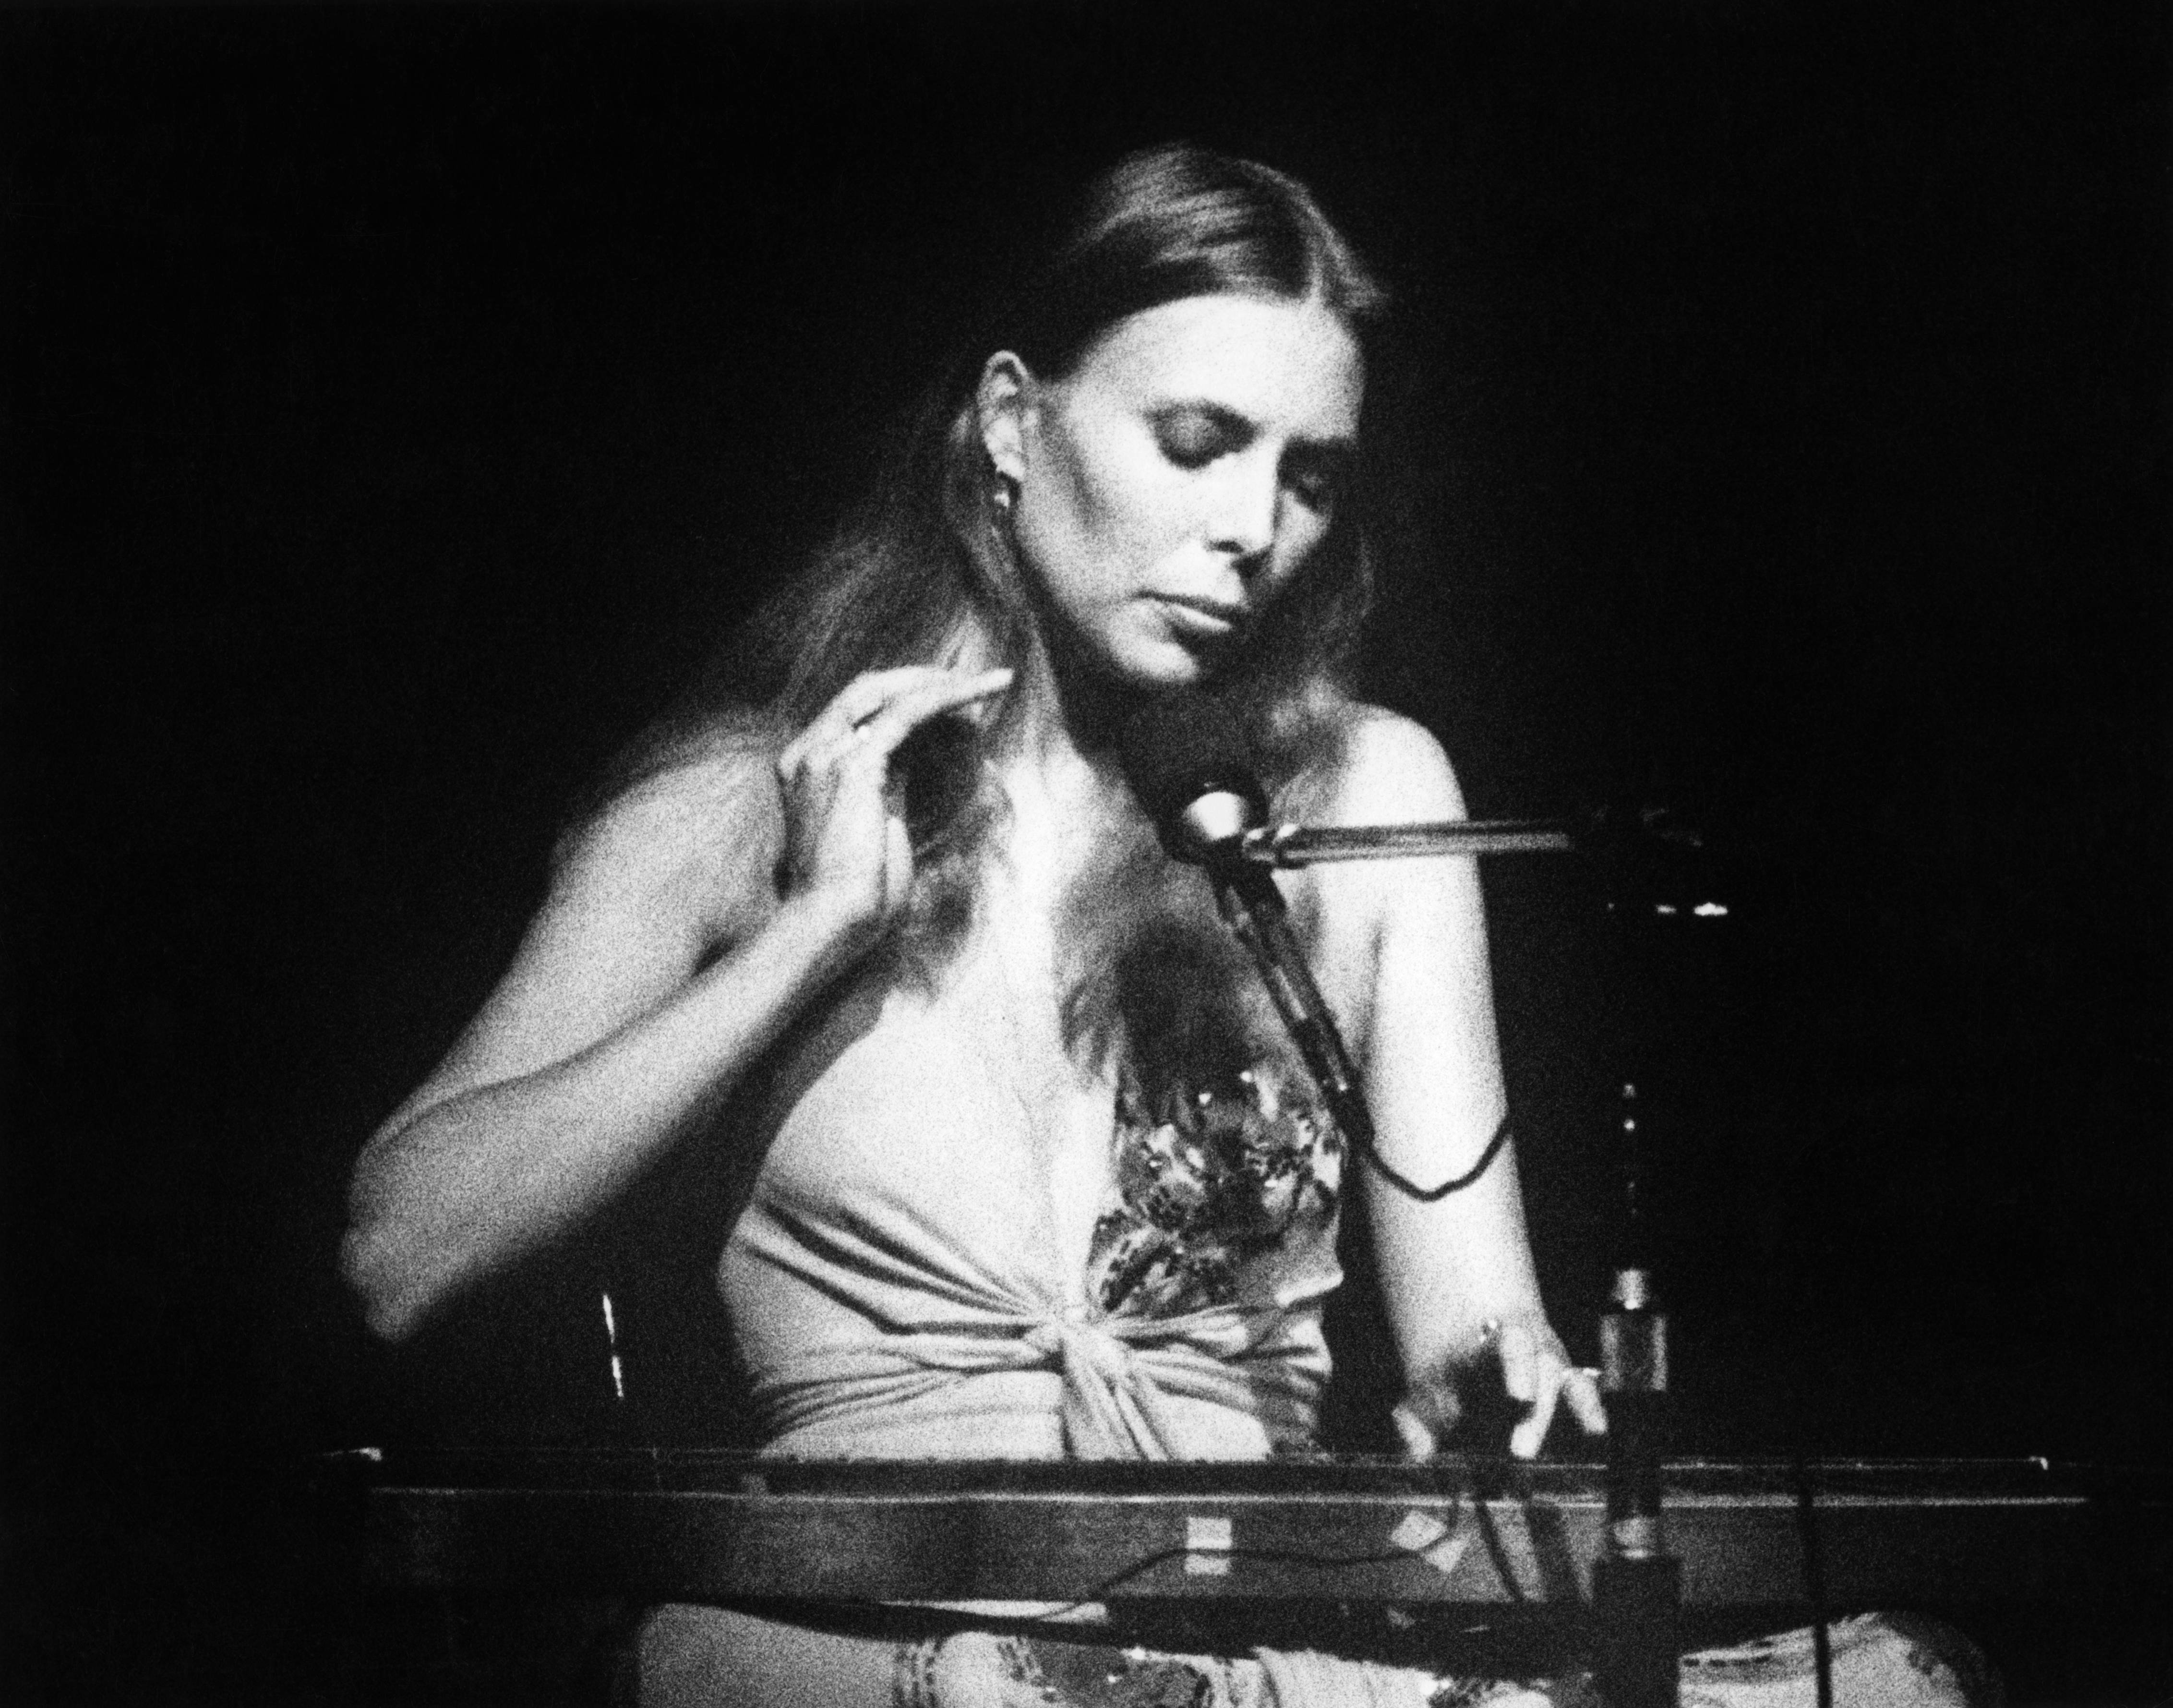 Joni Mitchell wears a white tank top and sits at a piano with a microphone.